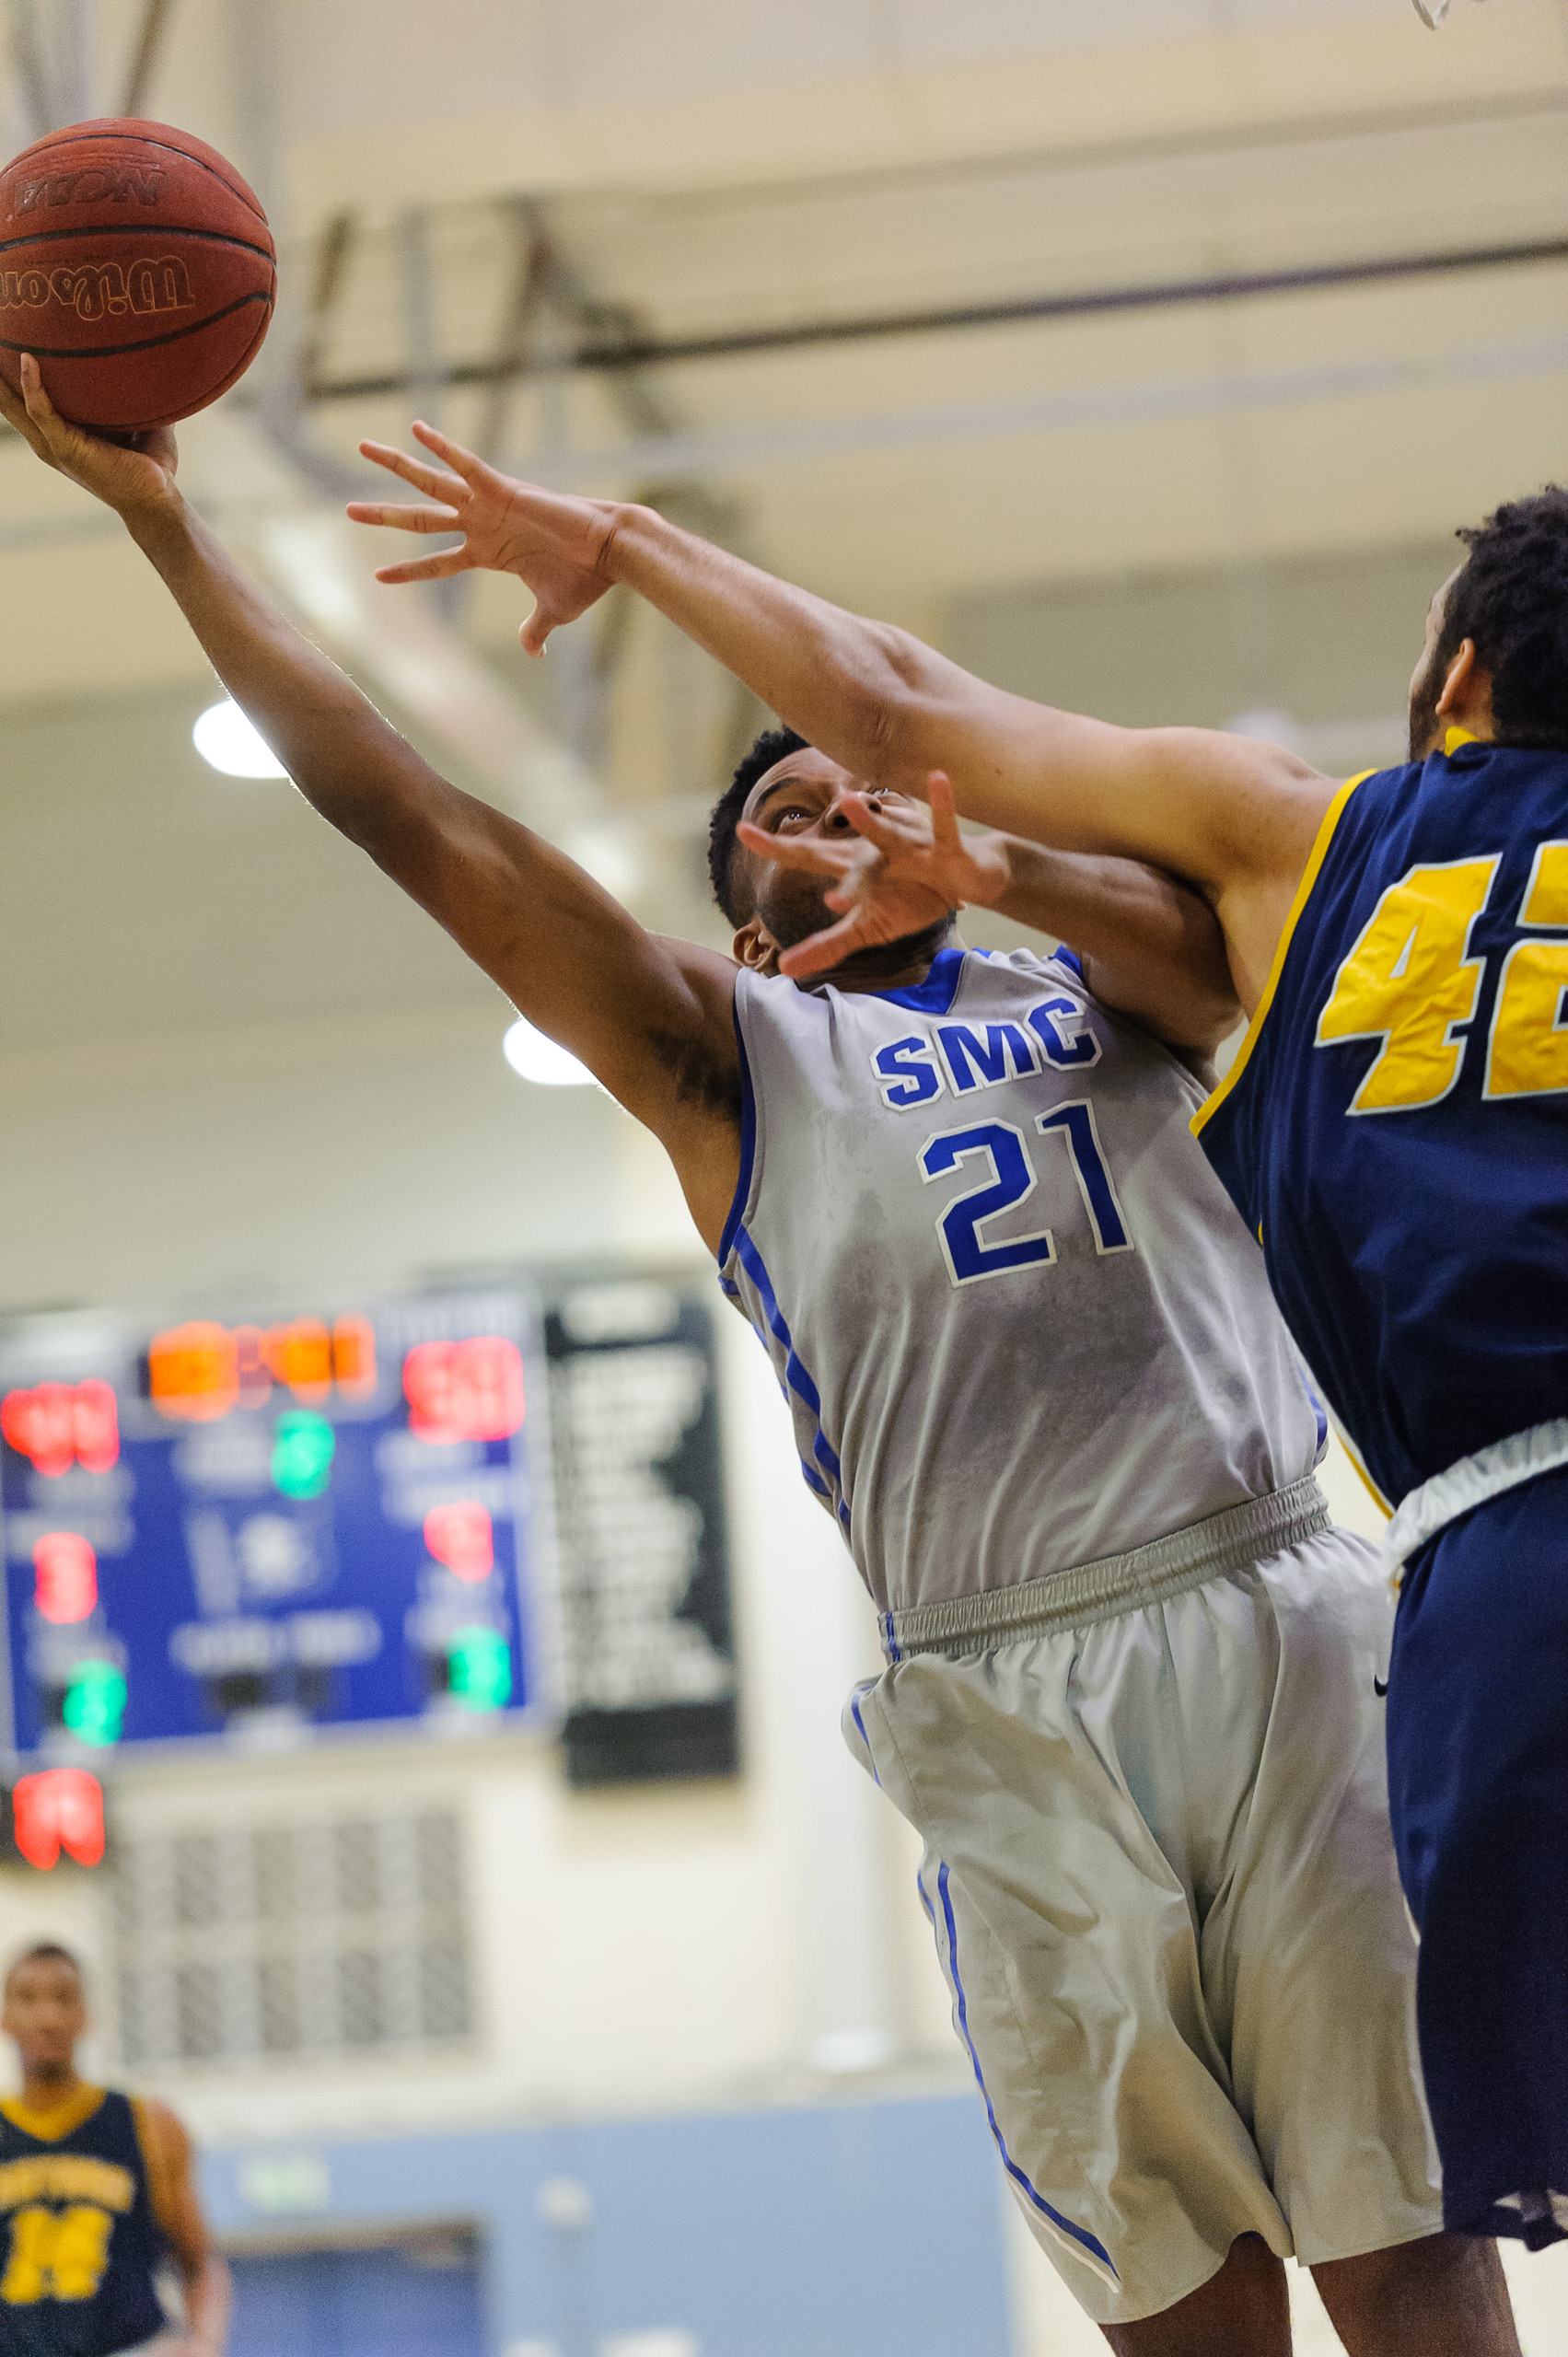  Forward Khalil Taylor (21,Left) of Santa Monica College attempts a layup while contested by Philip Webb (42,Right) of the College of the Canyons. The Santa Monica College Corsairs lose the game 74-72 to the College of the Canyons Cougars. The game w